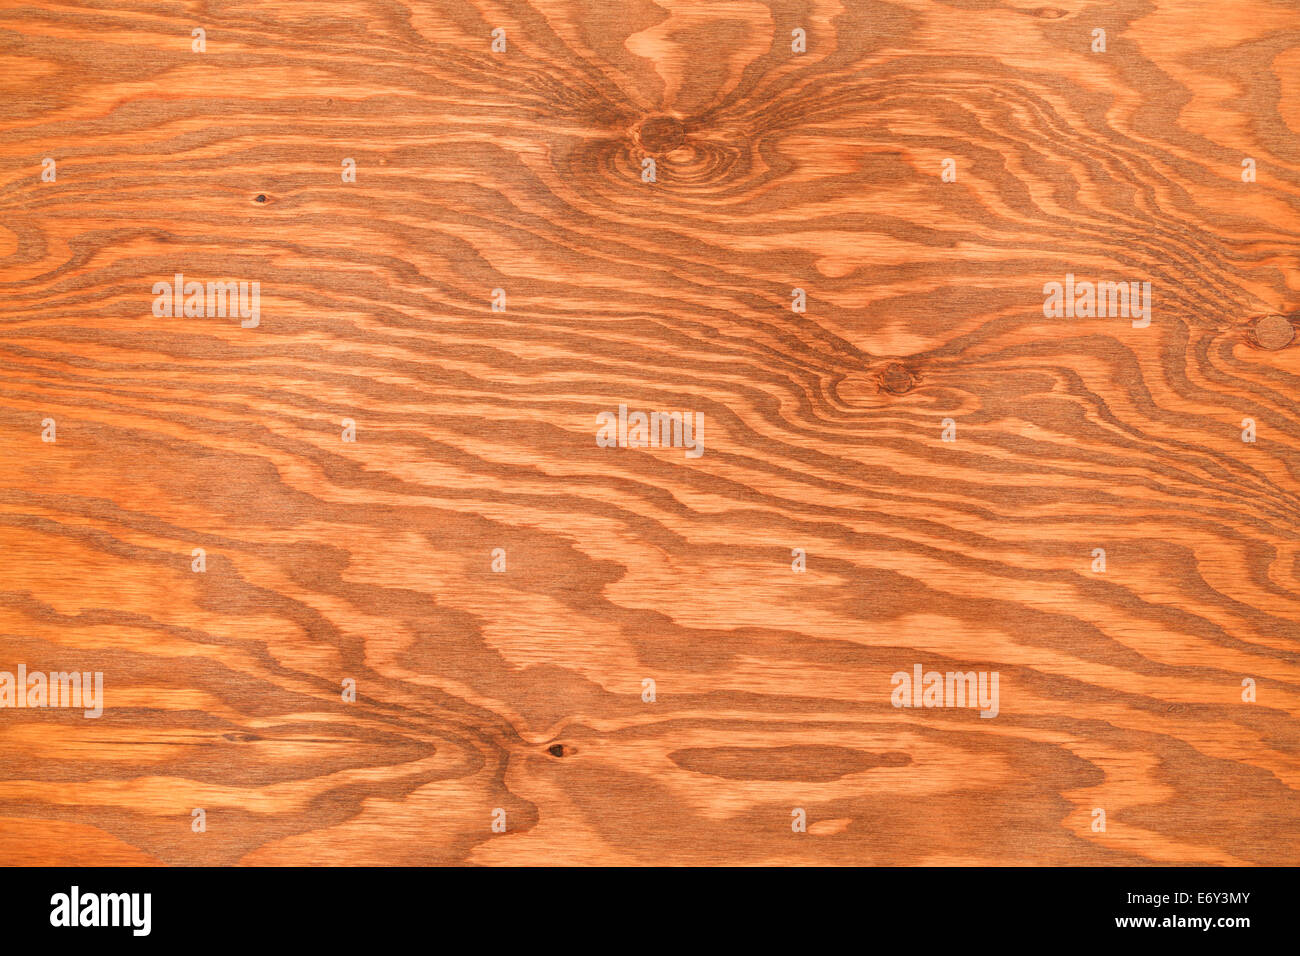 Brown Stained Pine Ply Wood Textured Background. Stock Photo